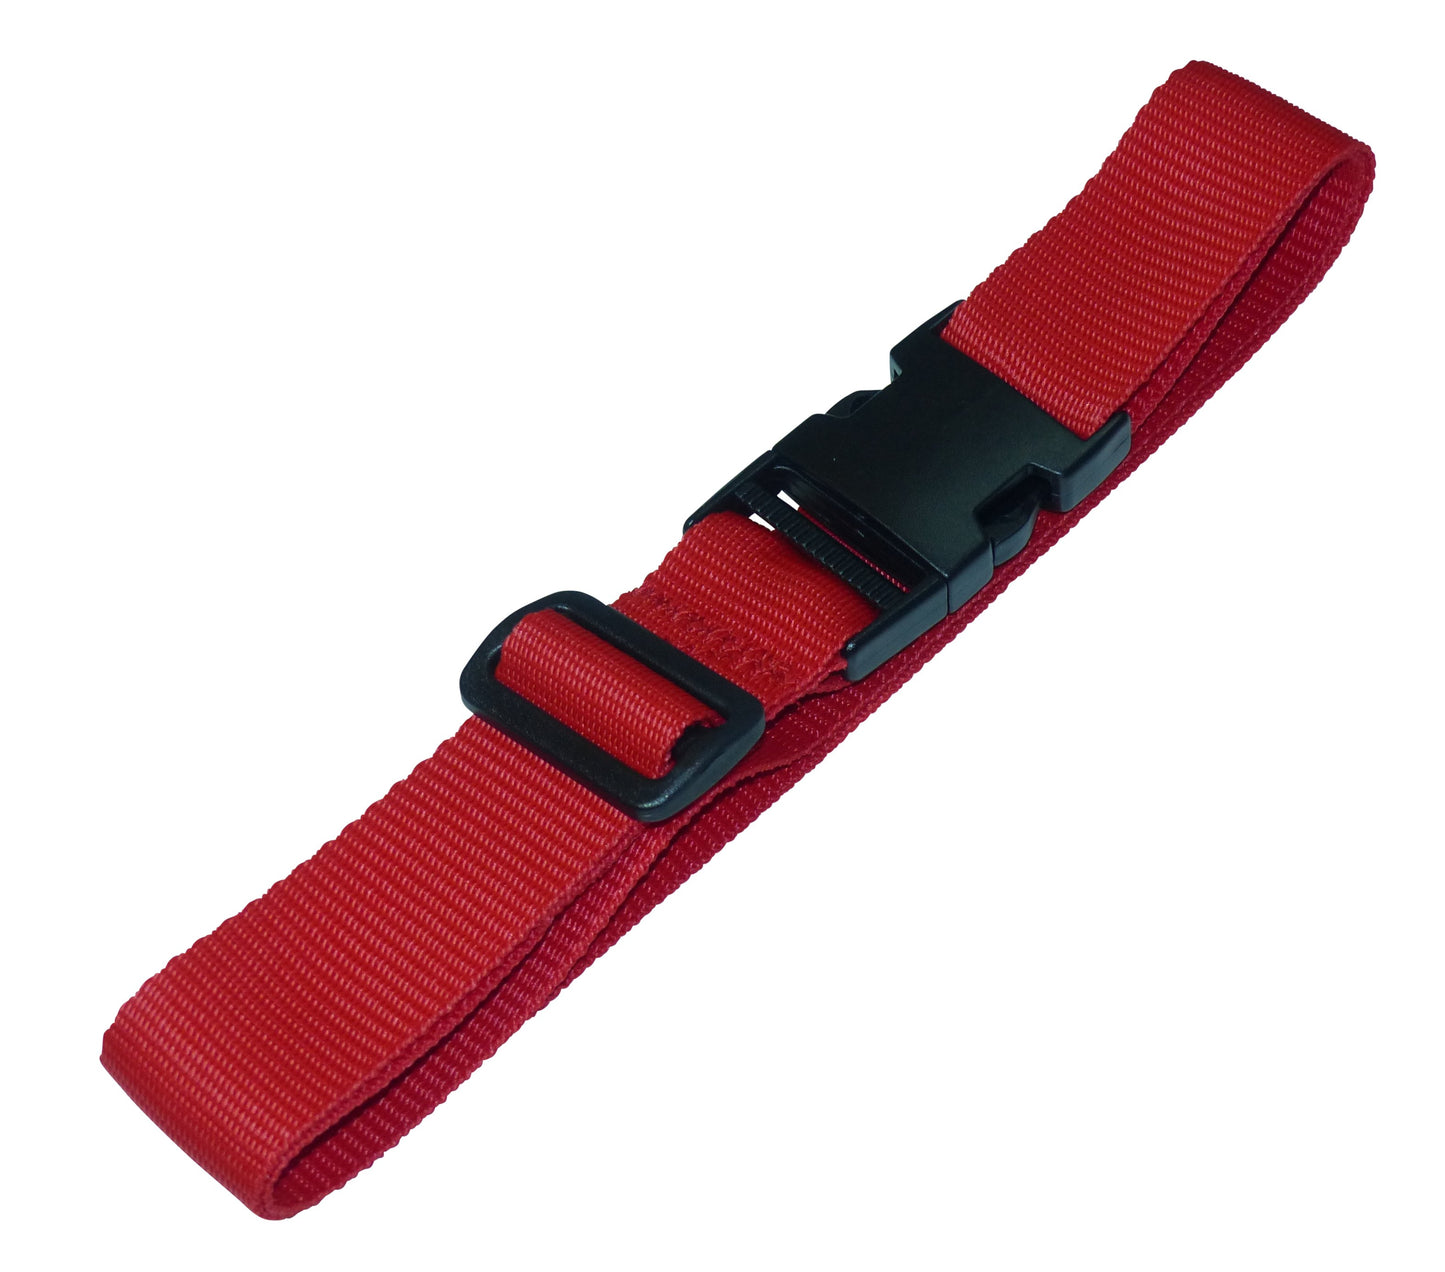 Benristraps 38mm Webbing Strap with Quick Release & Length-Adjusting Buckles in red